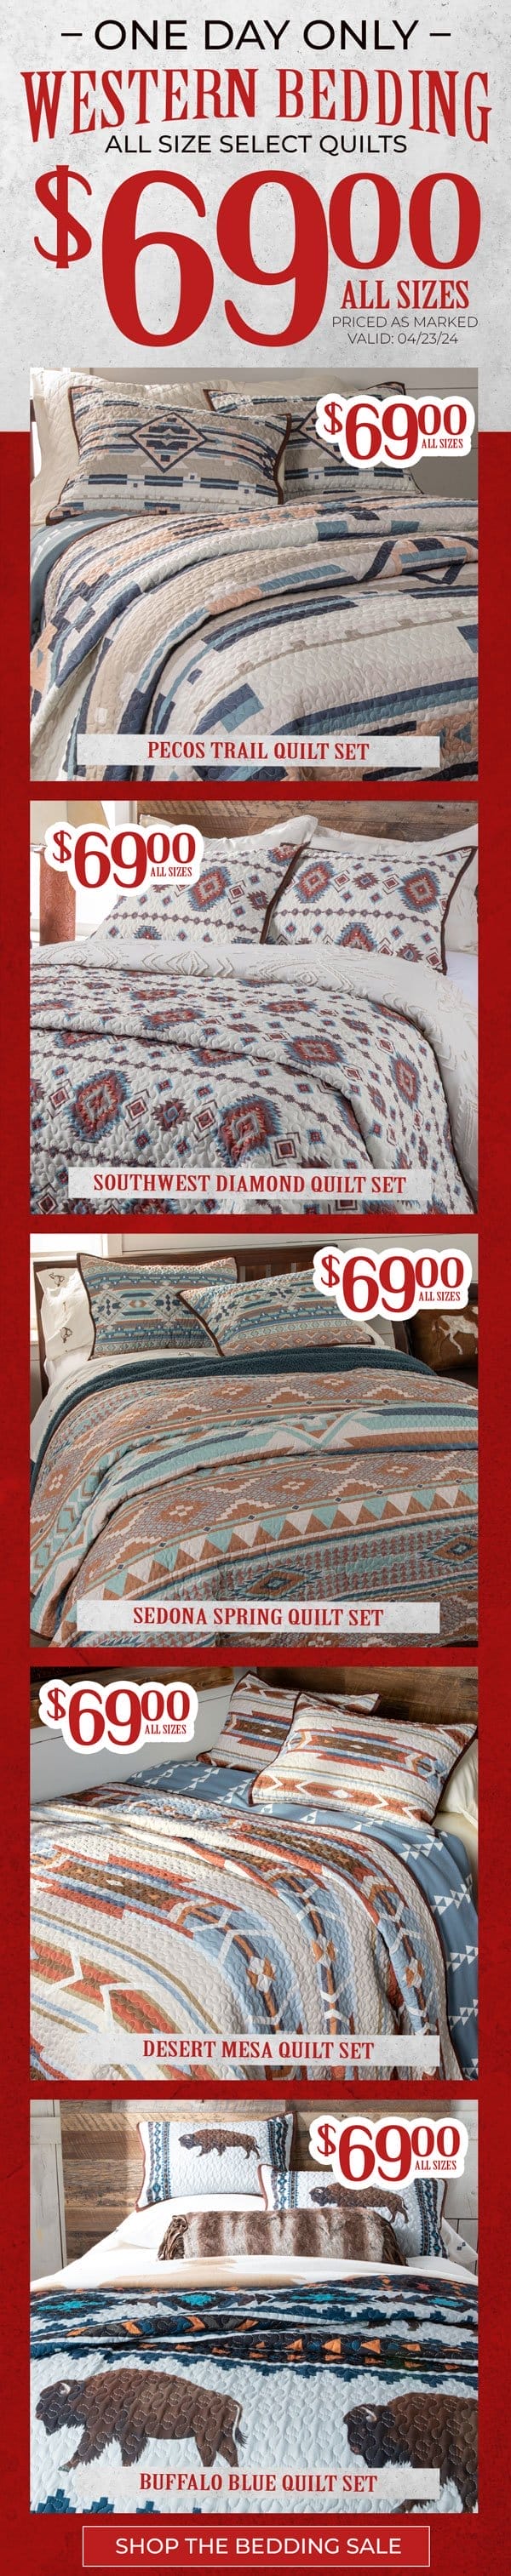 Select Western Bedding \\$69 all sizes